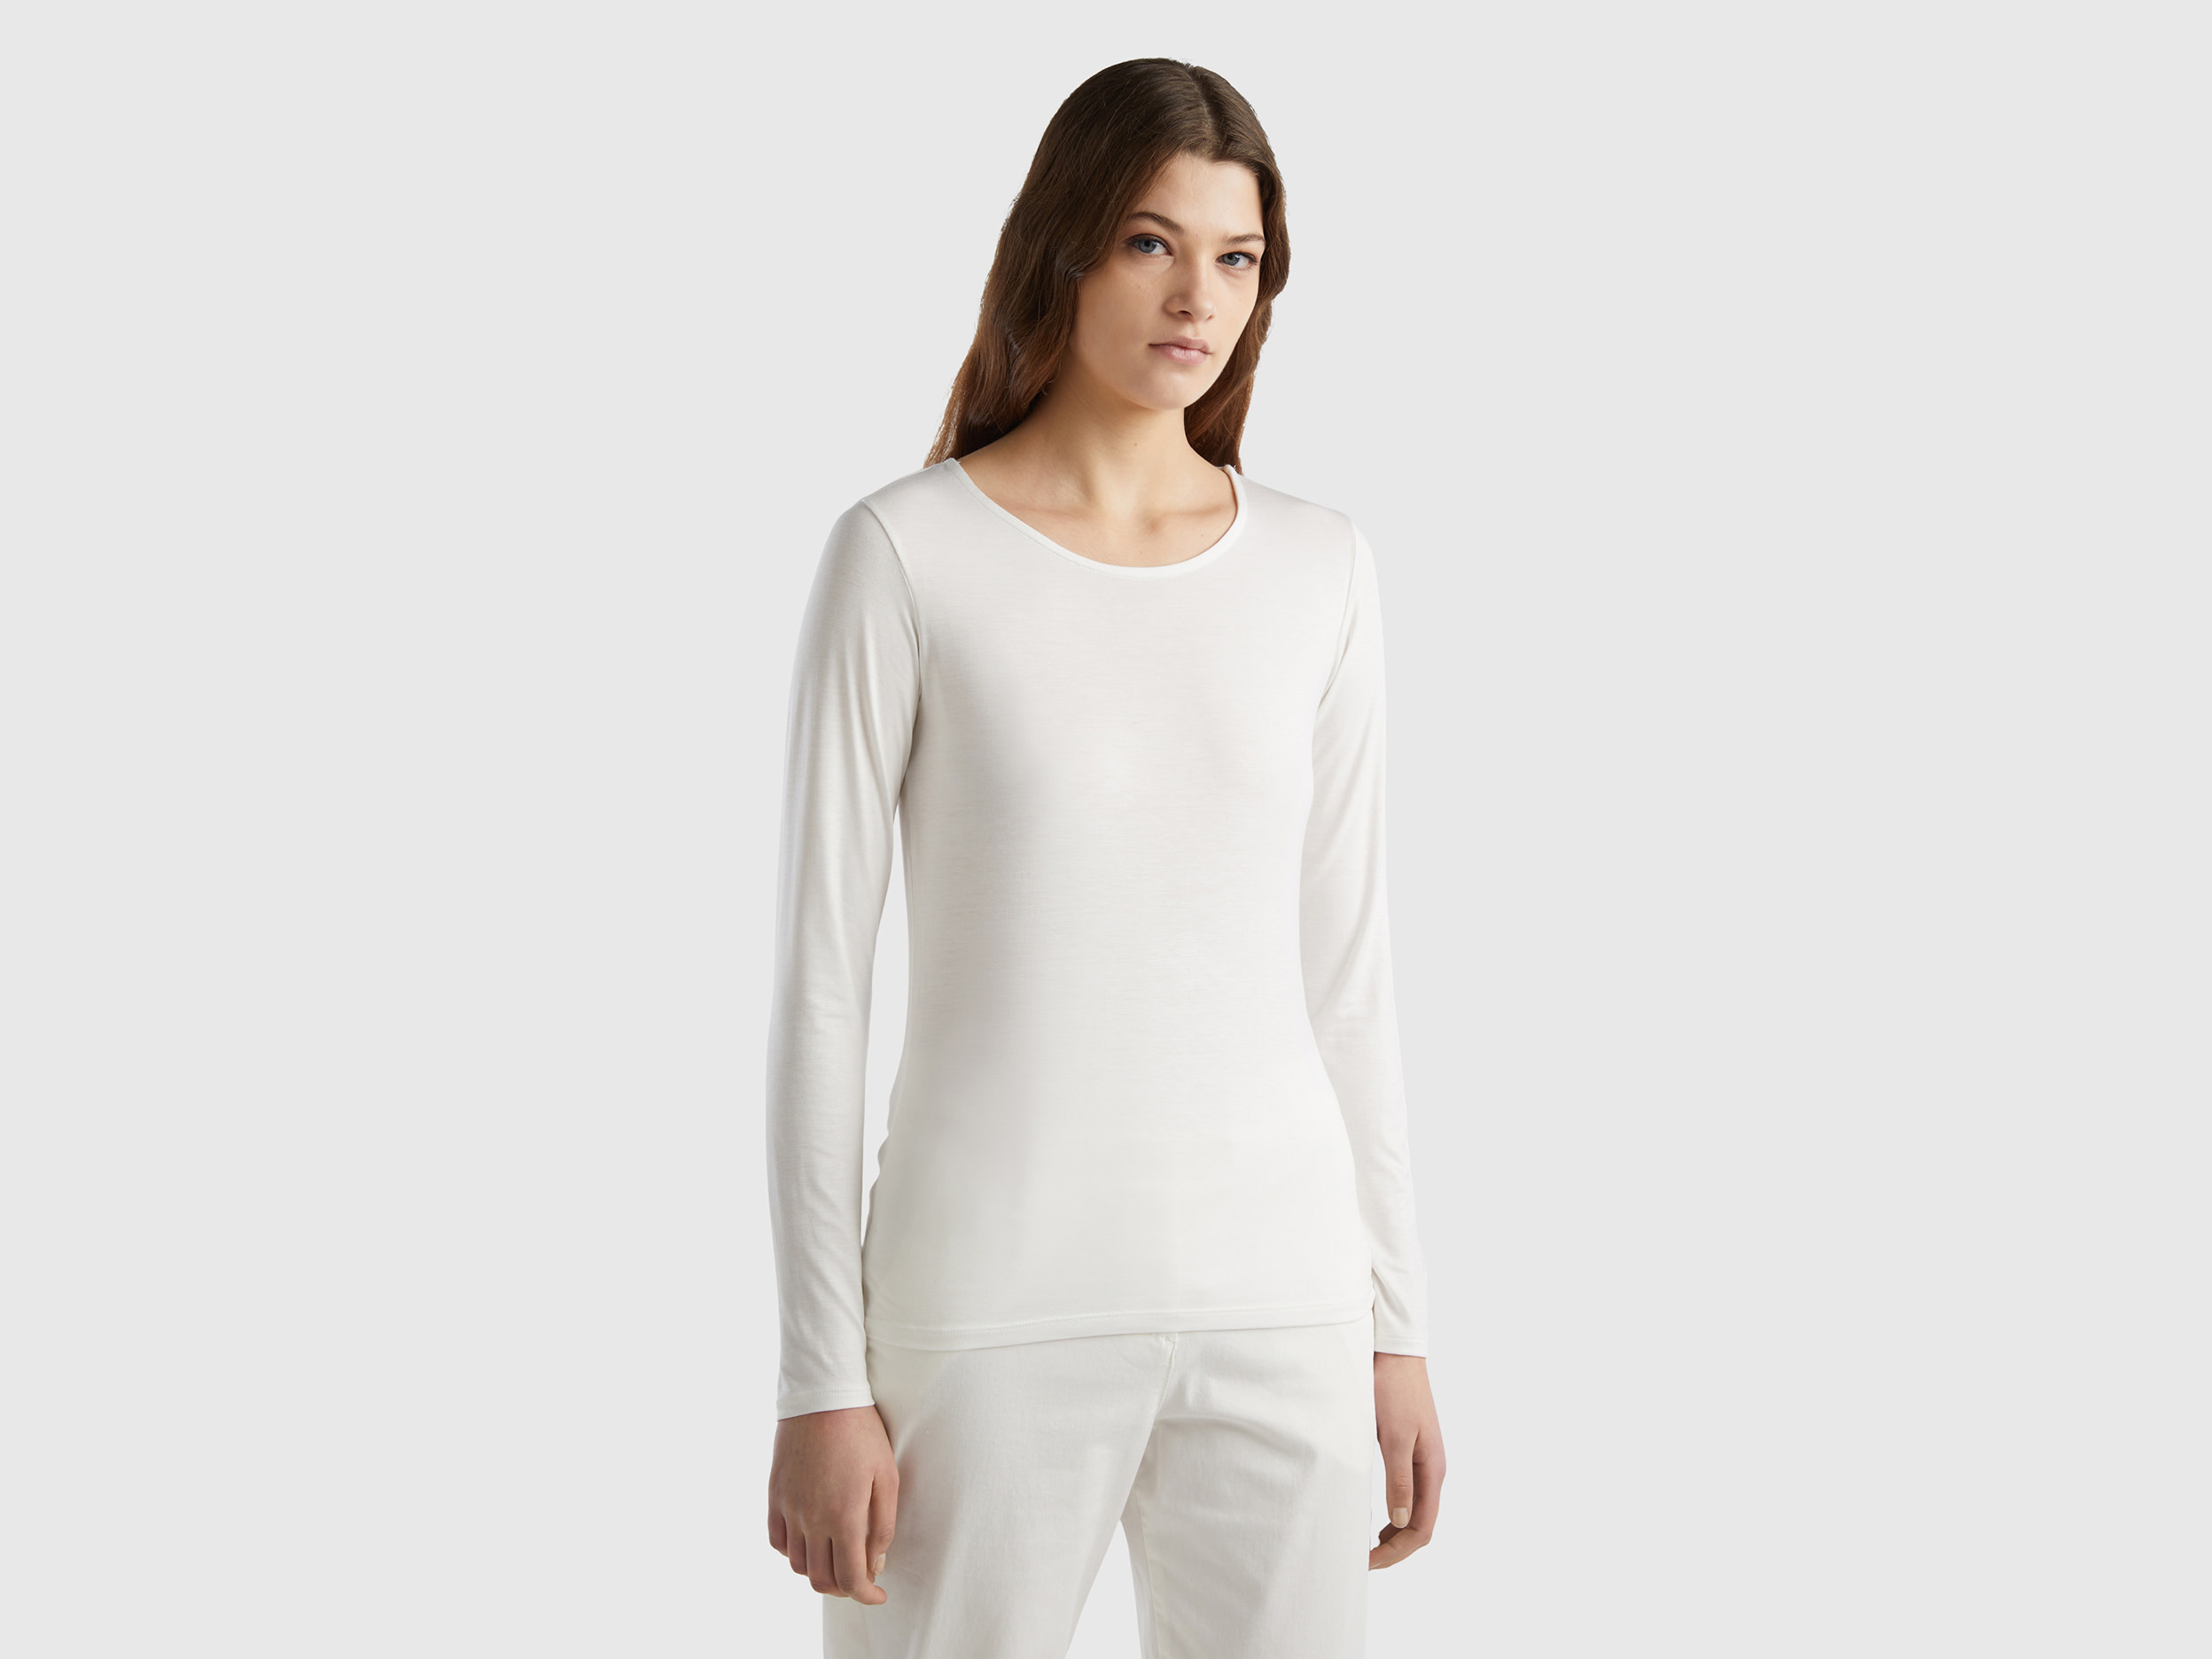 Benetton, T-shirt In Sustainable Stretch Viscose, size XS, Creamy White, Women